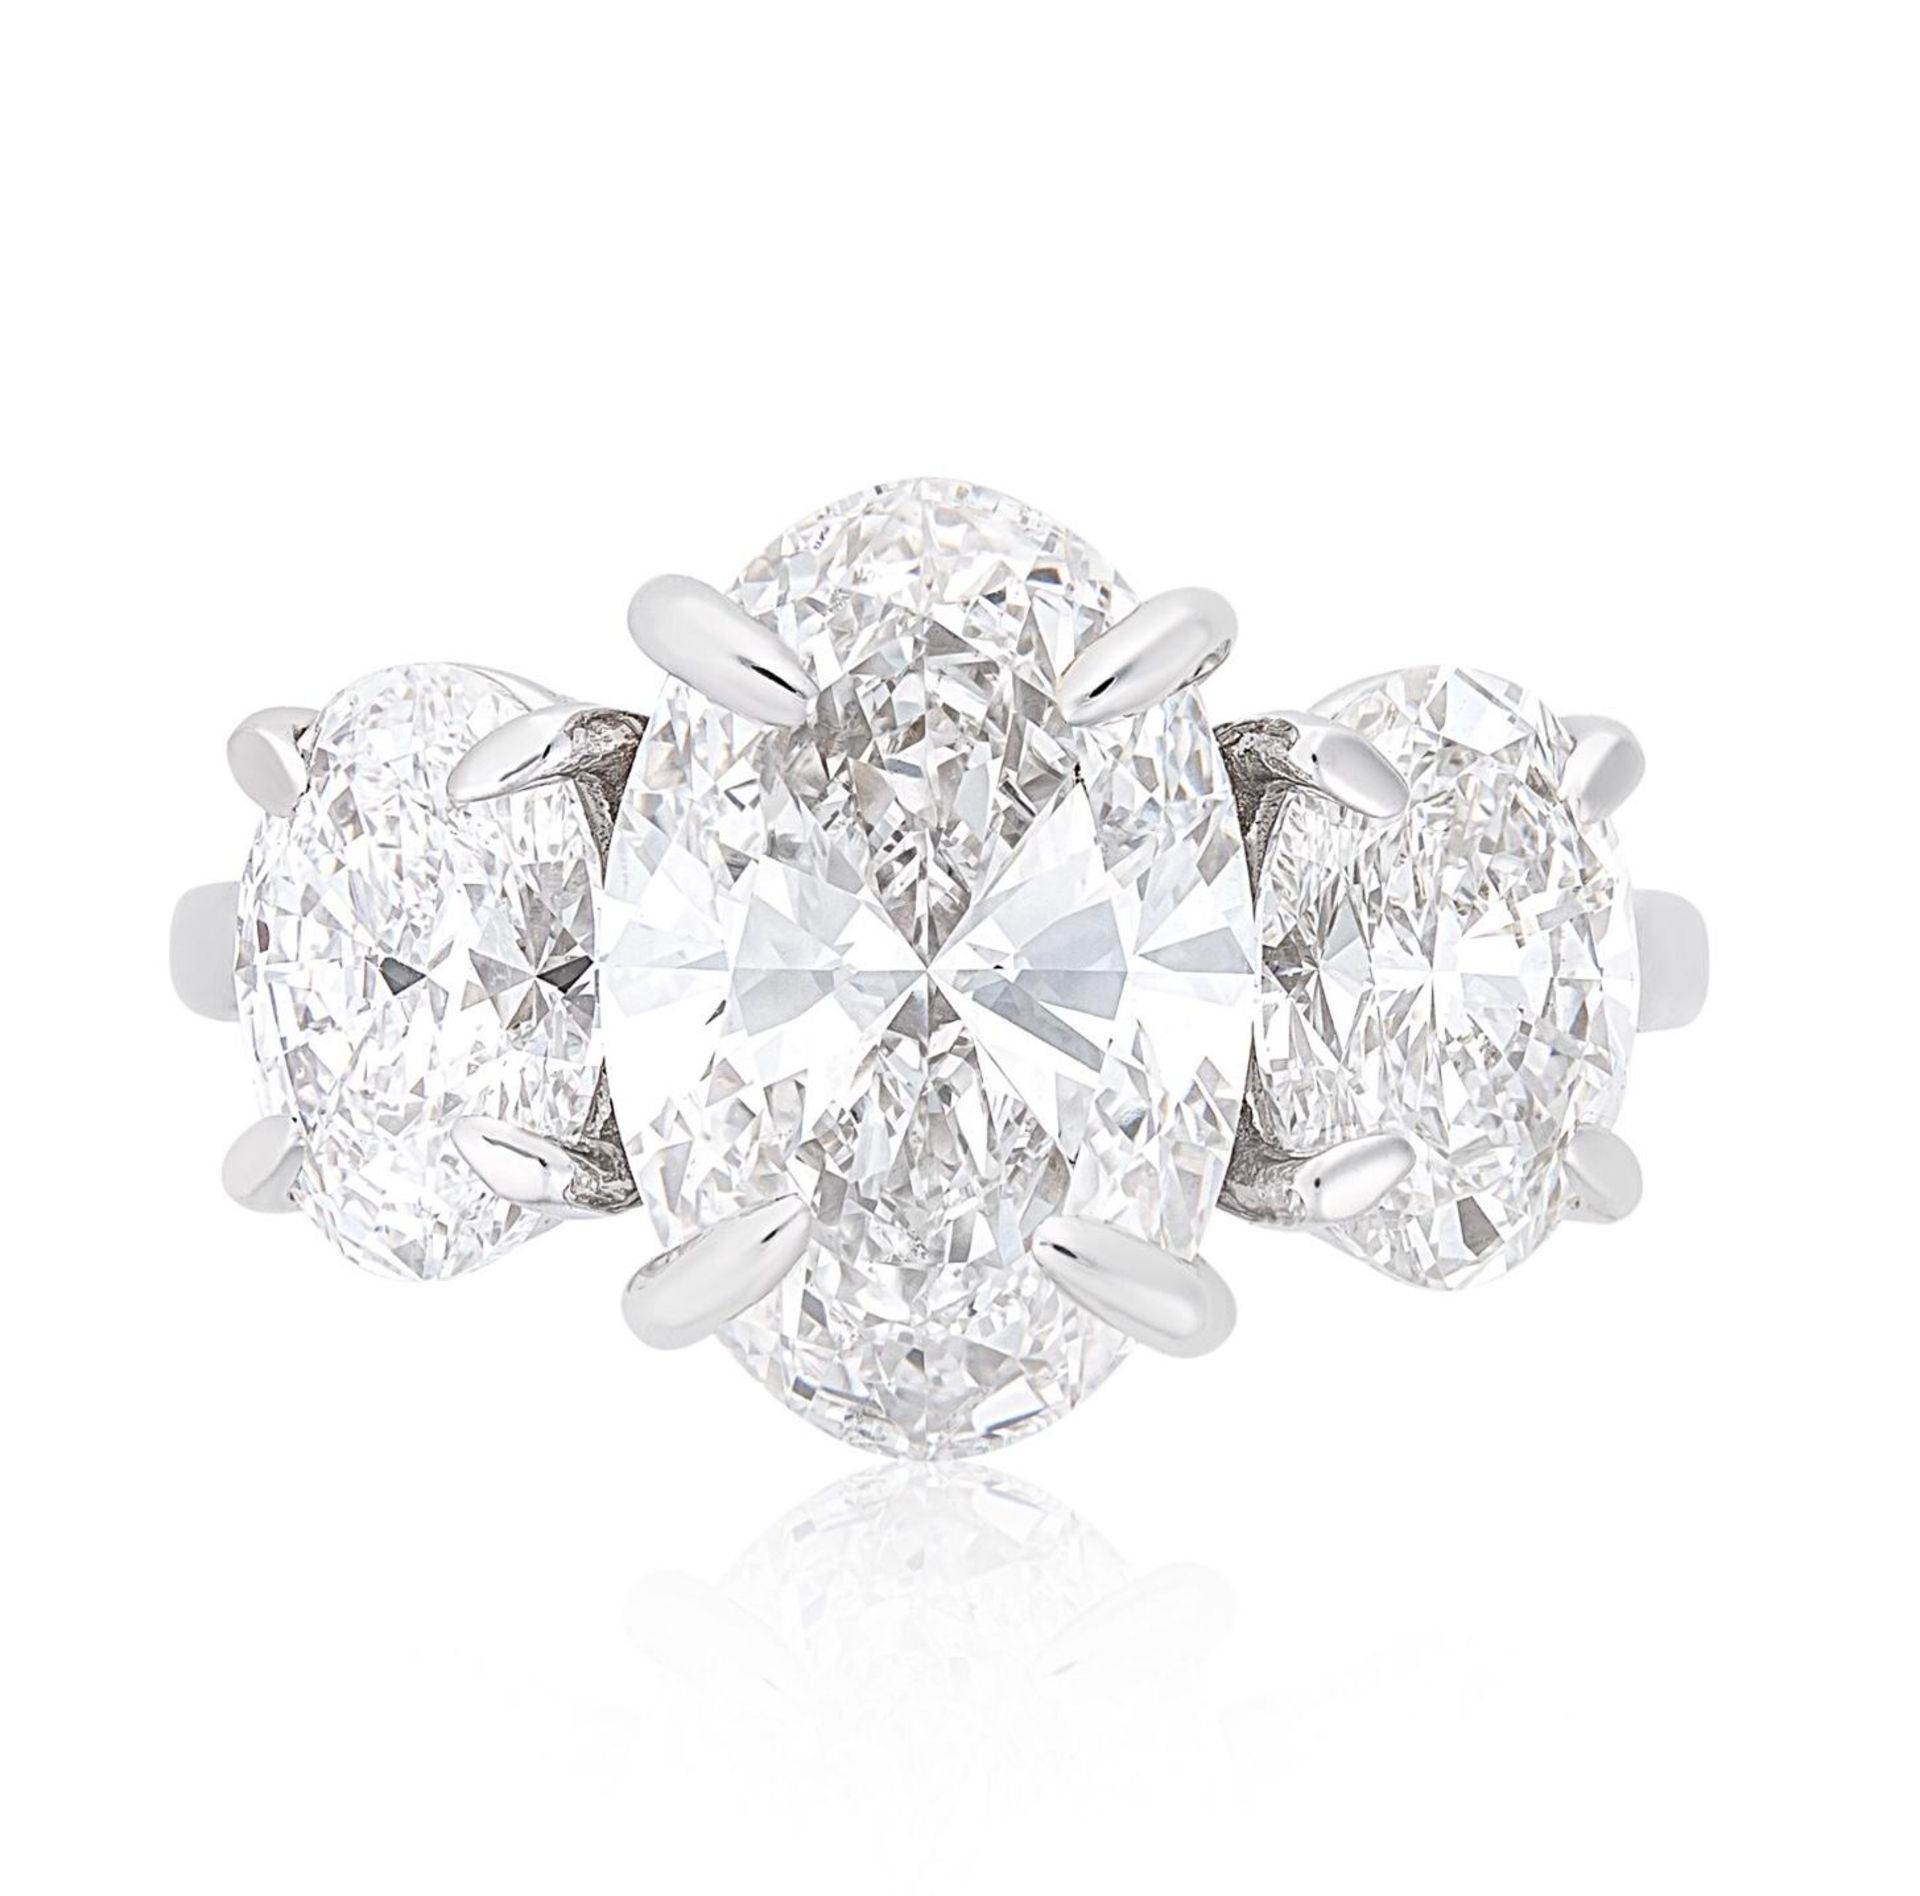 ** ON SALE ** Oval Brilliant Cut 5.07ct Trilogy Ring F Colour VS1 Clarity -Set 18KT White Gold - Image 3 of 5